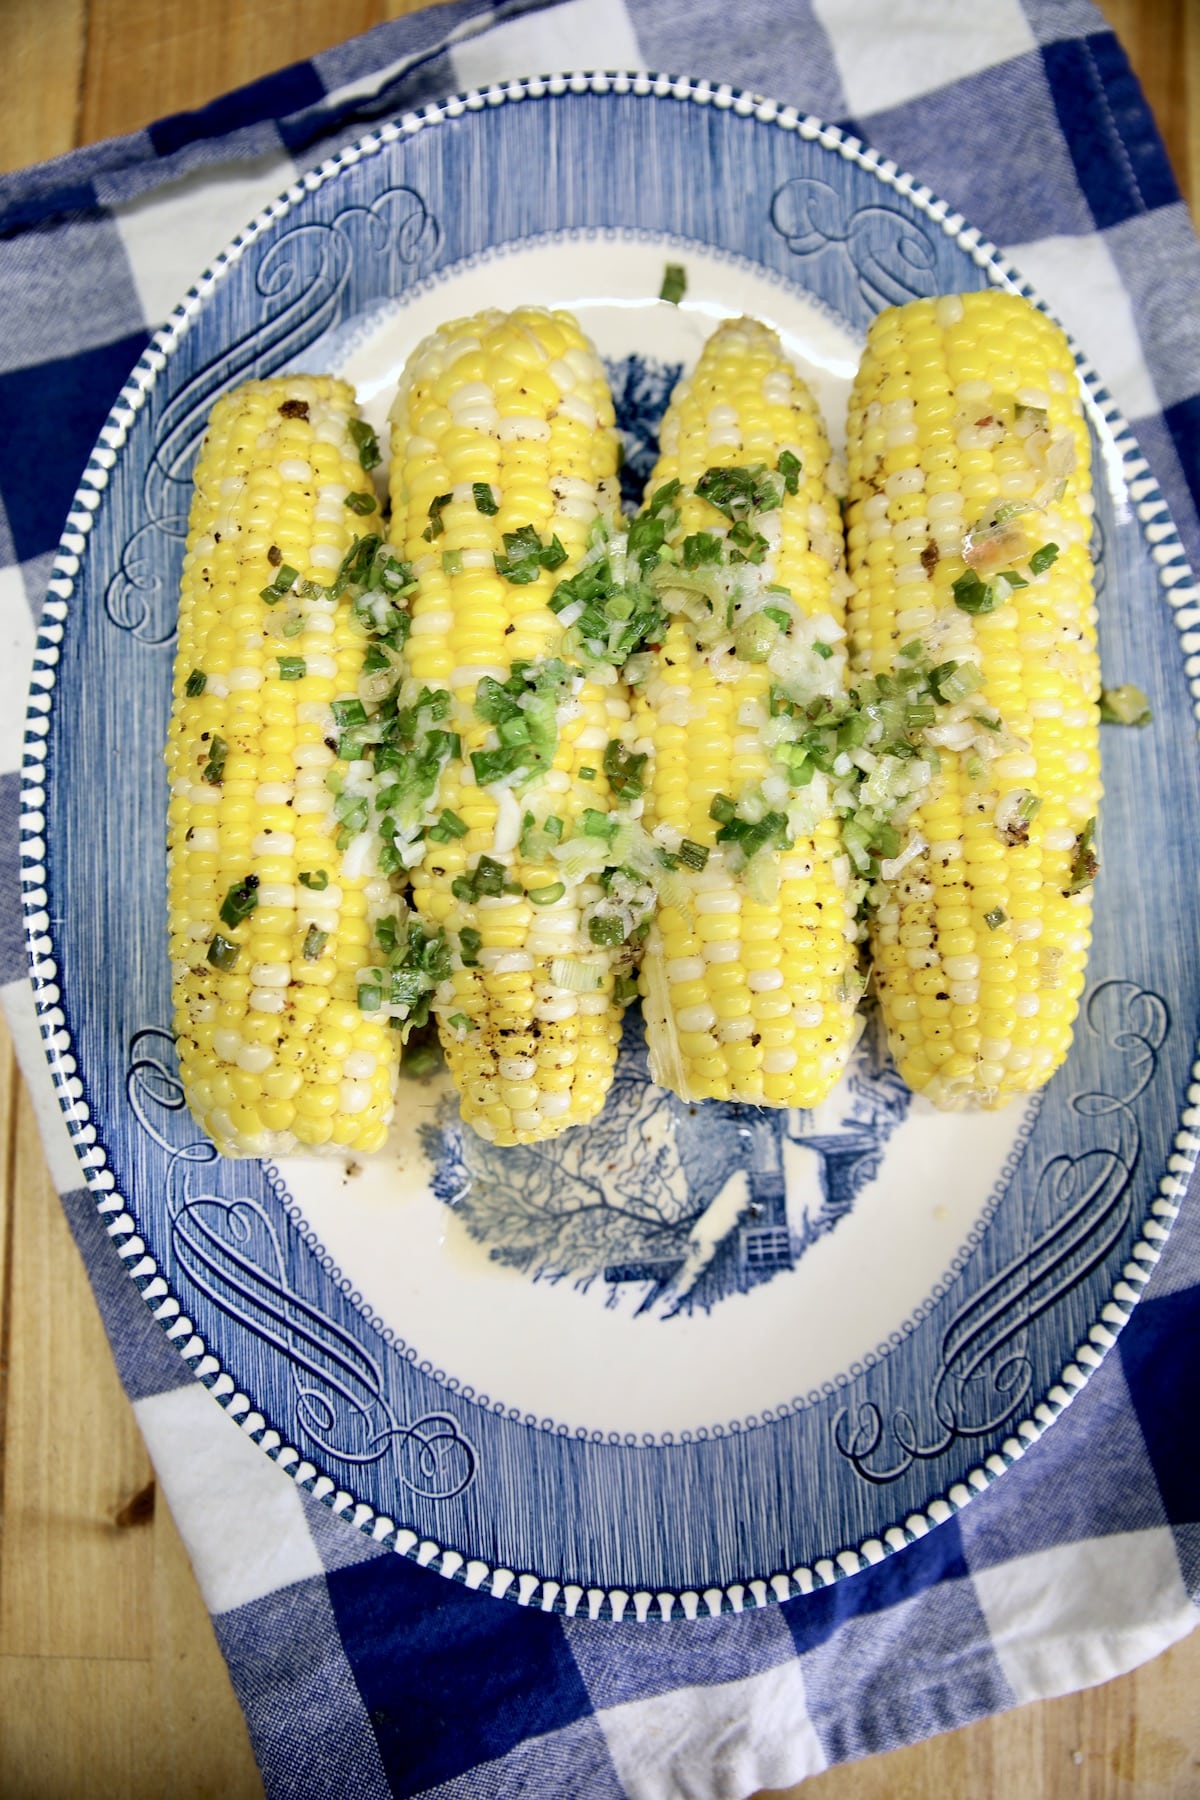 Platter with 4 corn on the cob cooked with green onions and butter.